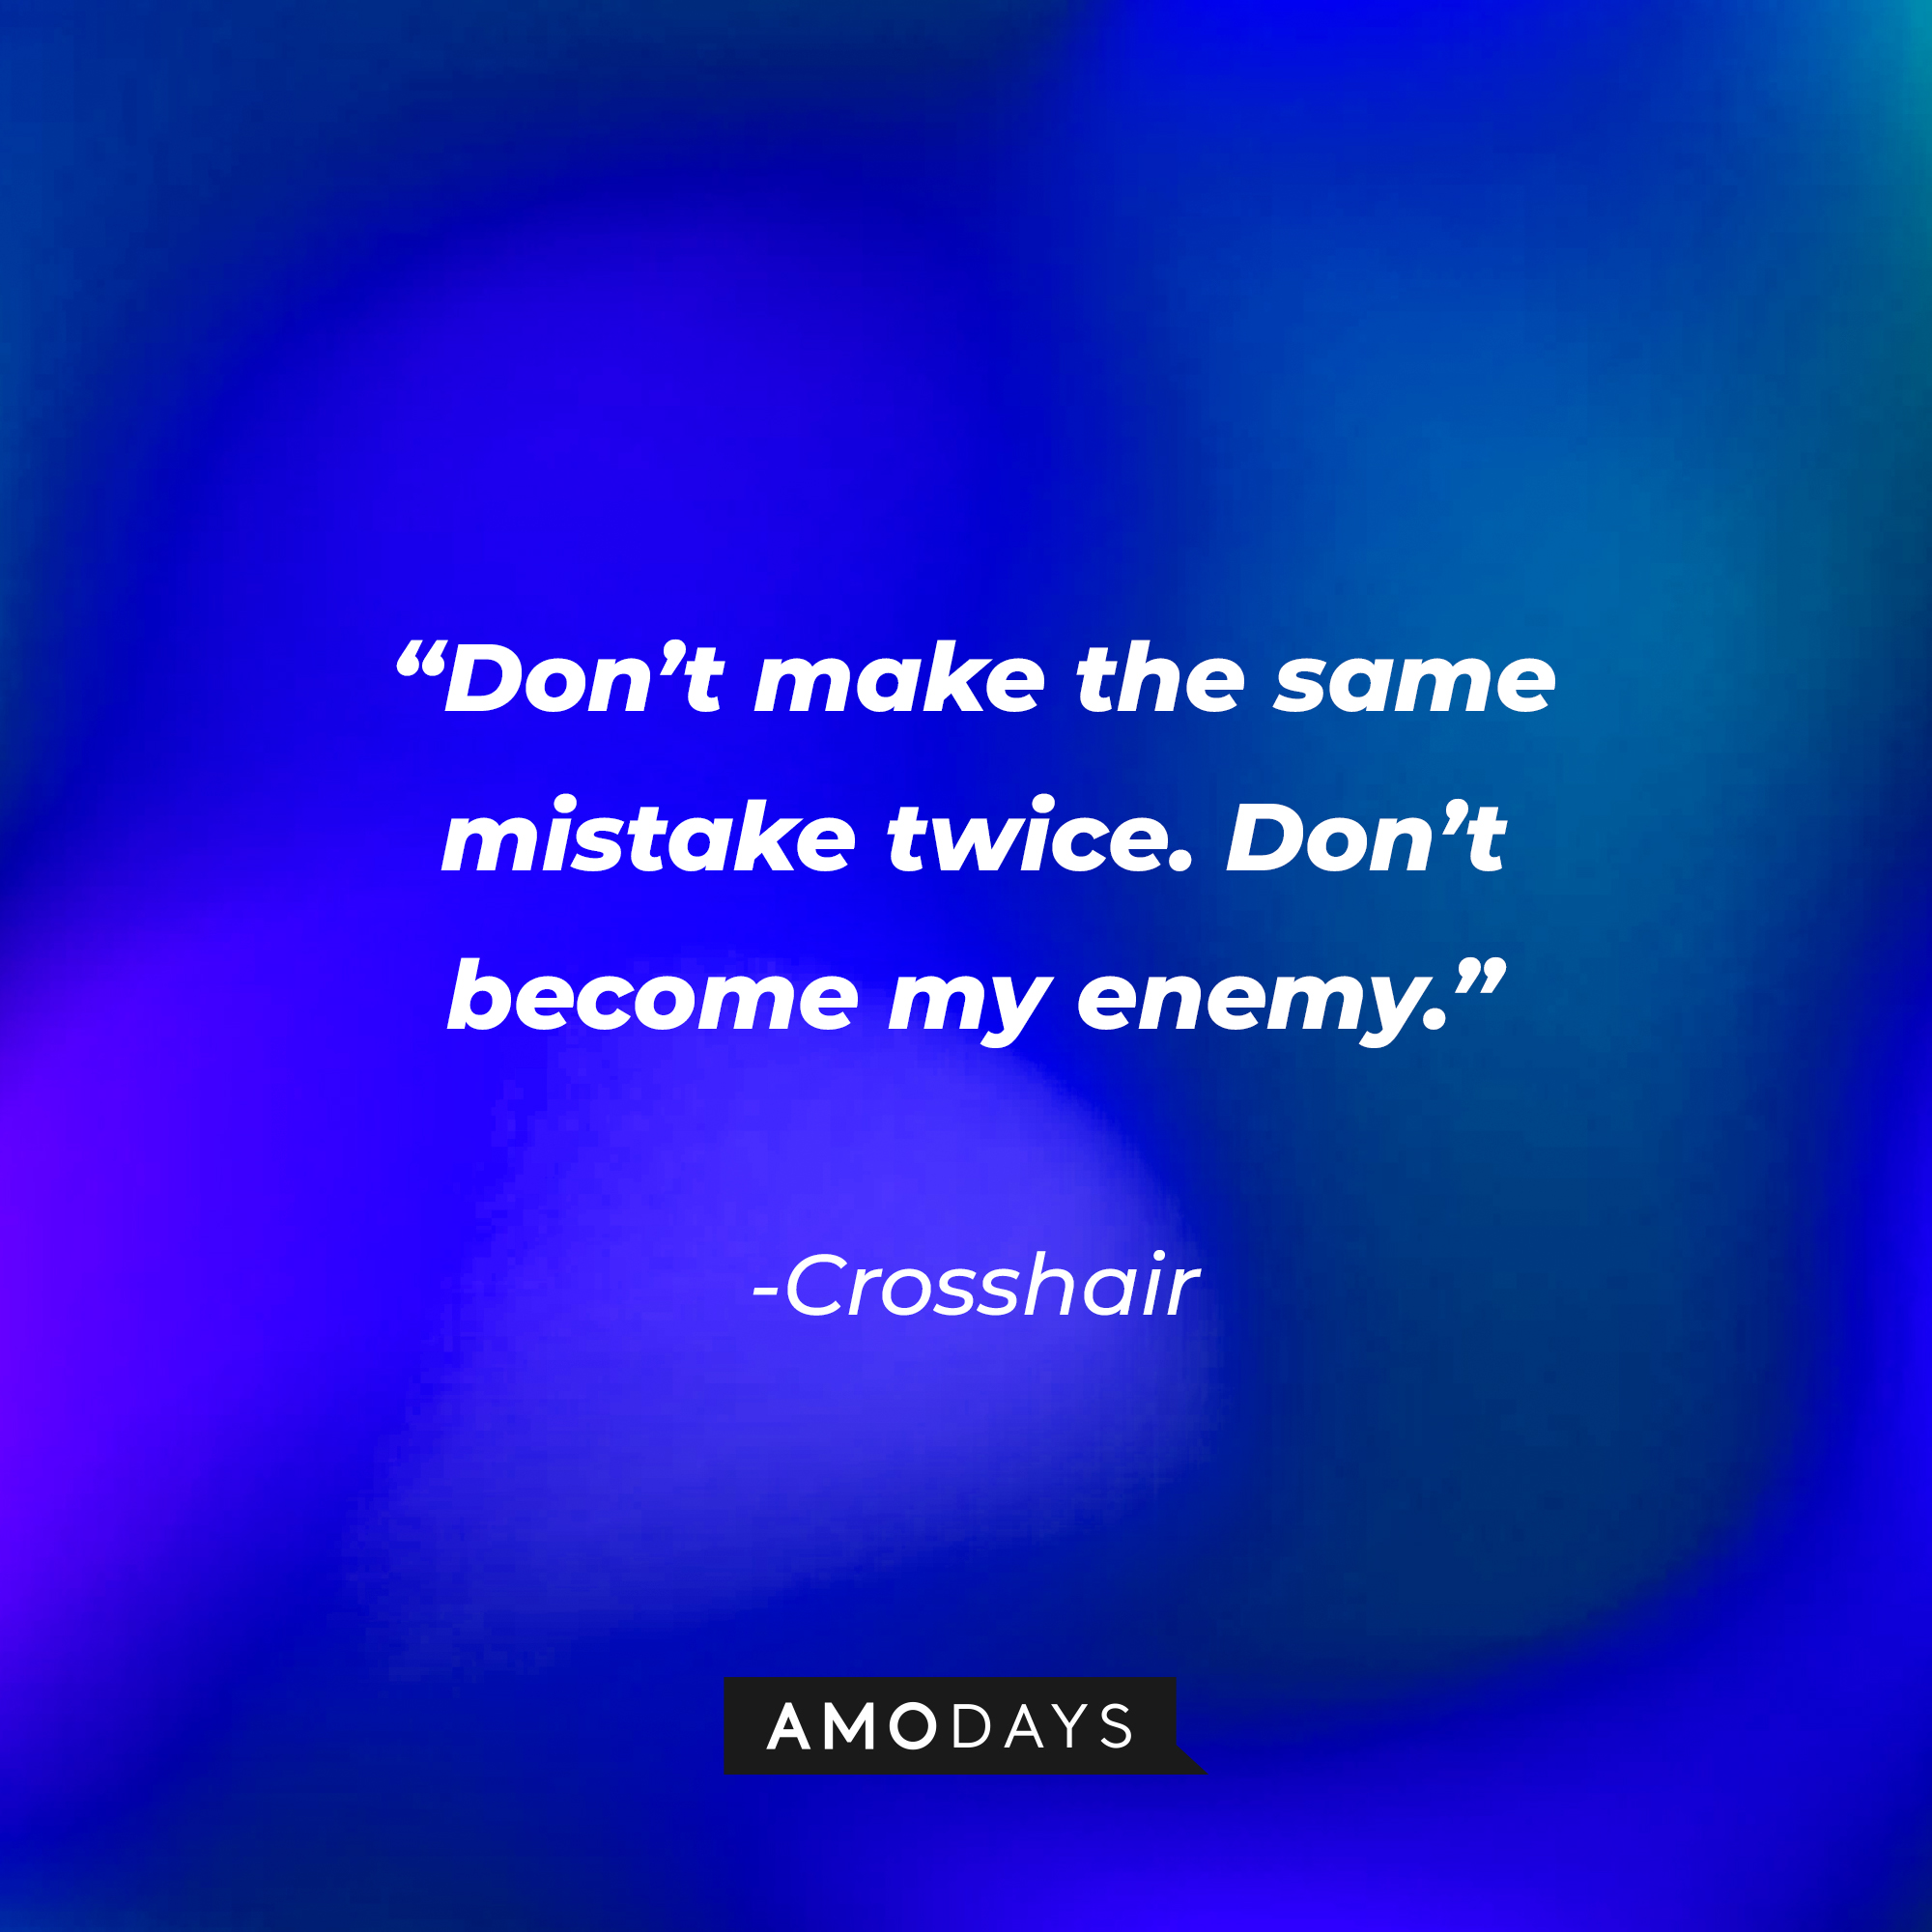 Crosshair’s quote: “Don’t make the same mistake twice. Don’t become my enemy.”  | Source: AmoDays